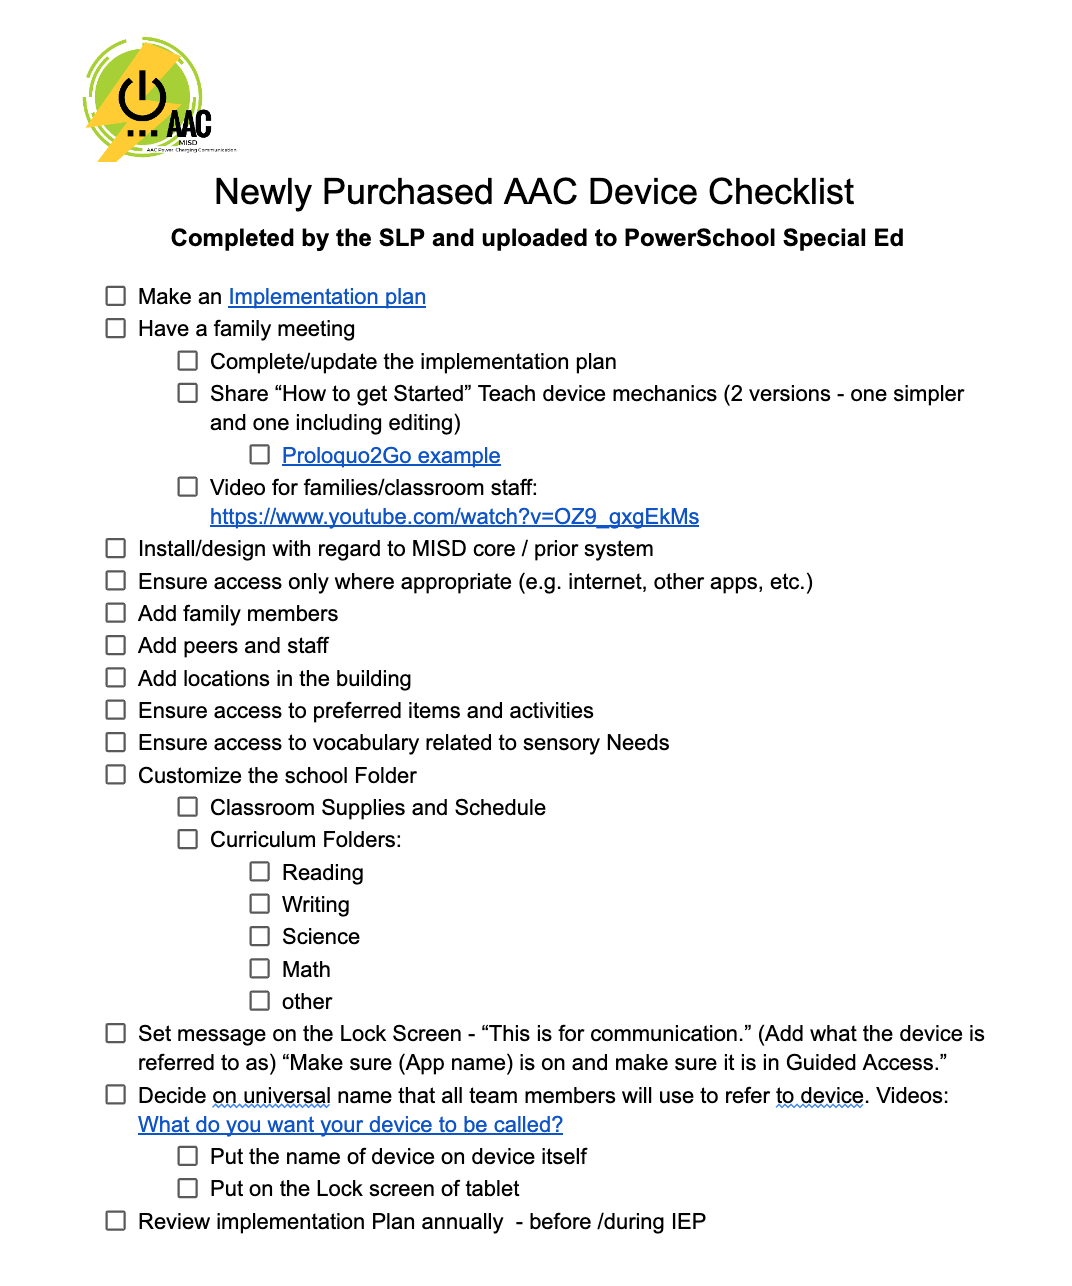 The MISD Newly Purchased Device Checklist will support the basic steps involved for setting up a communication device with personalization and team support.